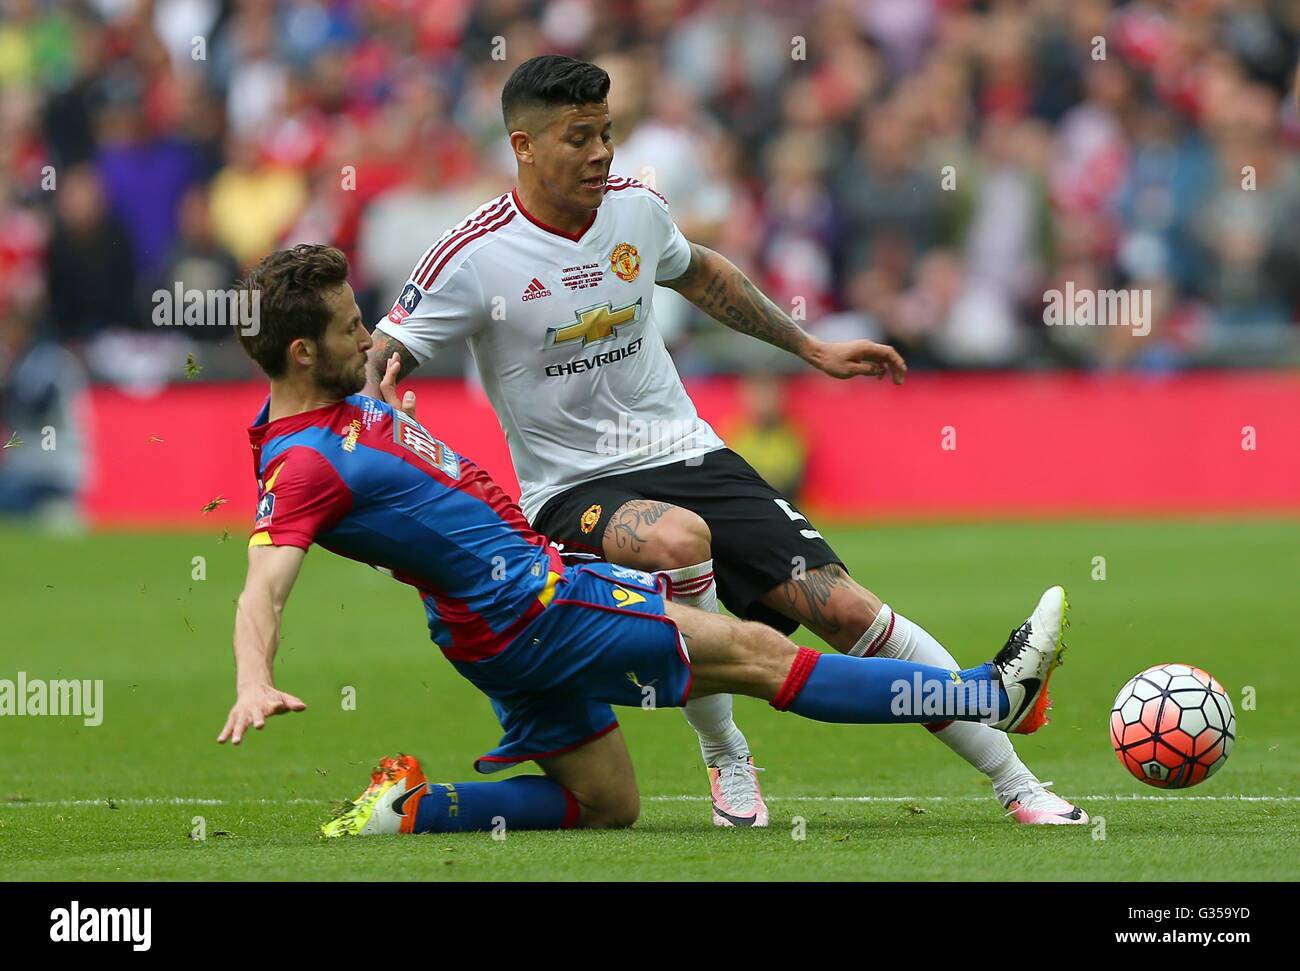 Crystal Palace’s Yohan Cabaye  slides in to tackle Marcos Rojo of Manchester United  during the Emirates FA Cup Final between Crystal Palace and Manchester United at Wembley Stadium in London. May 21, 2016. EDITORIAL USE ONLY. No use with unauthorized audio, video, data, fixture lists, club/league logos or 'live' services. Online in-match use limited to 75 images, no video emulation. No use in betting, games or single club/league/player publications. James Boardman / Telephoto Images +44 7967 642437 James Boardman / Telephoto Images +44 7967 642437 Stock Photo